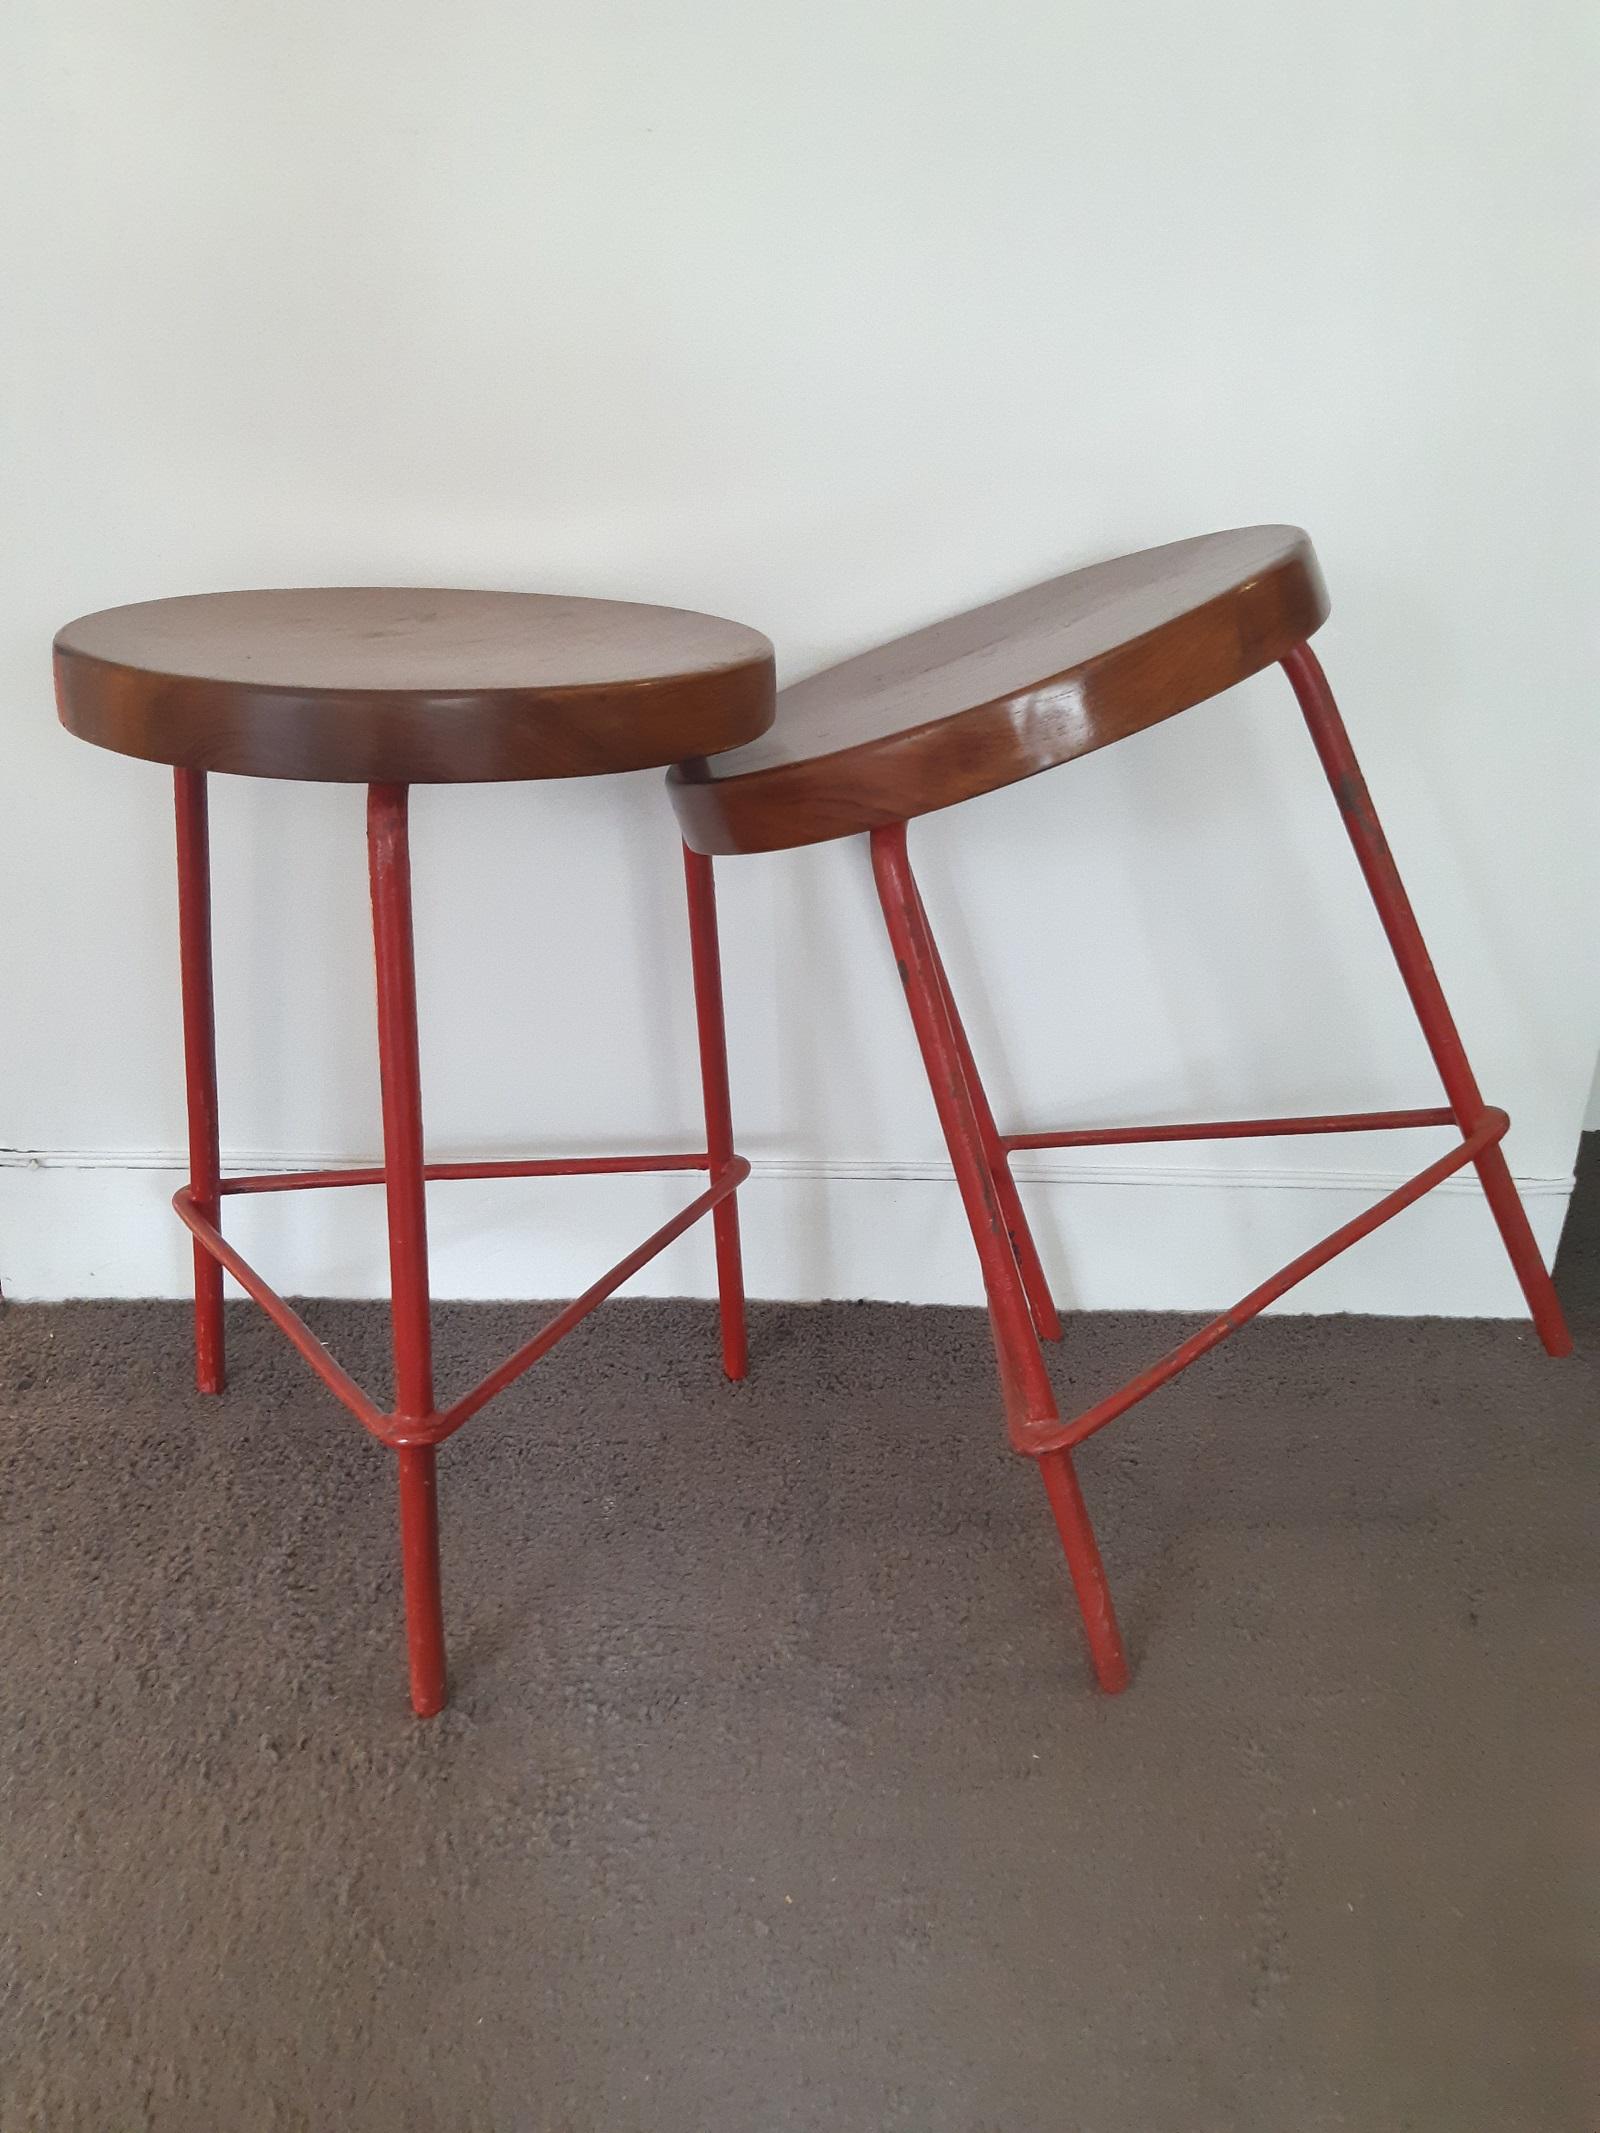 Pair of Pierre Jeanneret stools from the College of Architecture in Chandigarh, India.
Base in red lacquered metal and seat in teak.
D33cm, H48cm.

Price is for one stool